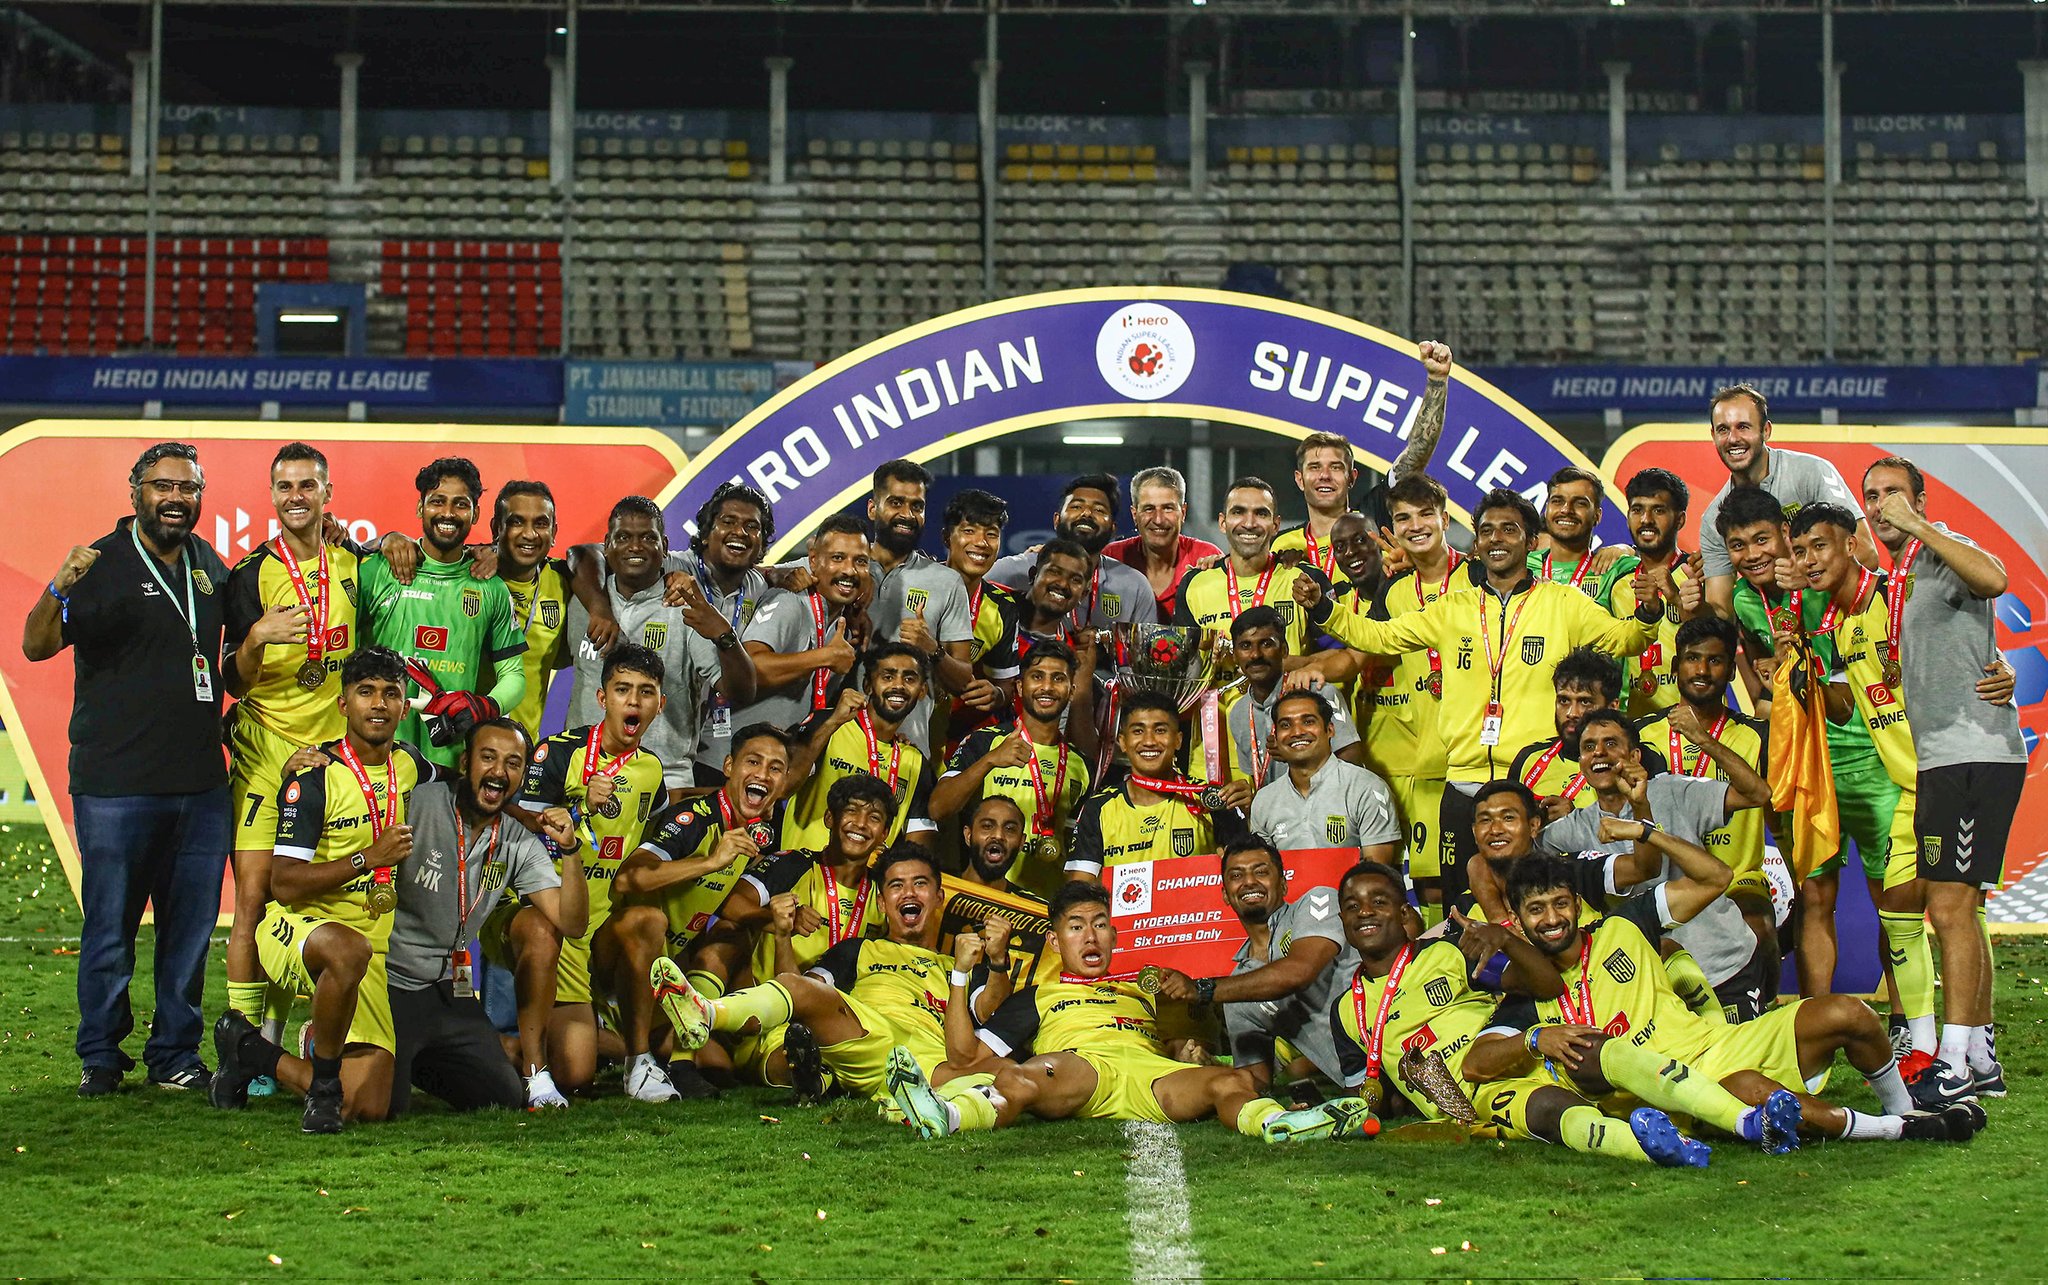 SAFF Club ChHFC VS MCFC LIVE STREAMING: Hyderabad FC to defend title against Mumbai City FC-Check LIVE STREAMINGampionship 2023: Hyderabad FC, Kerala Blasters FC to represent India in maiden edition of tournament-Check Out